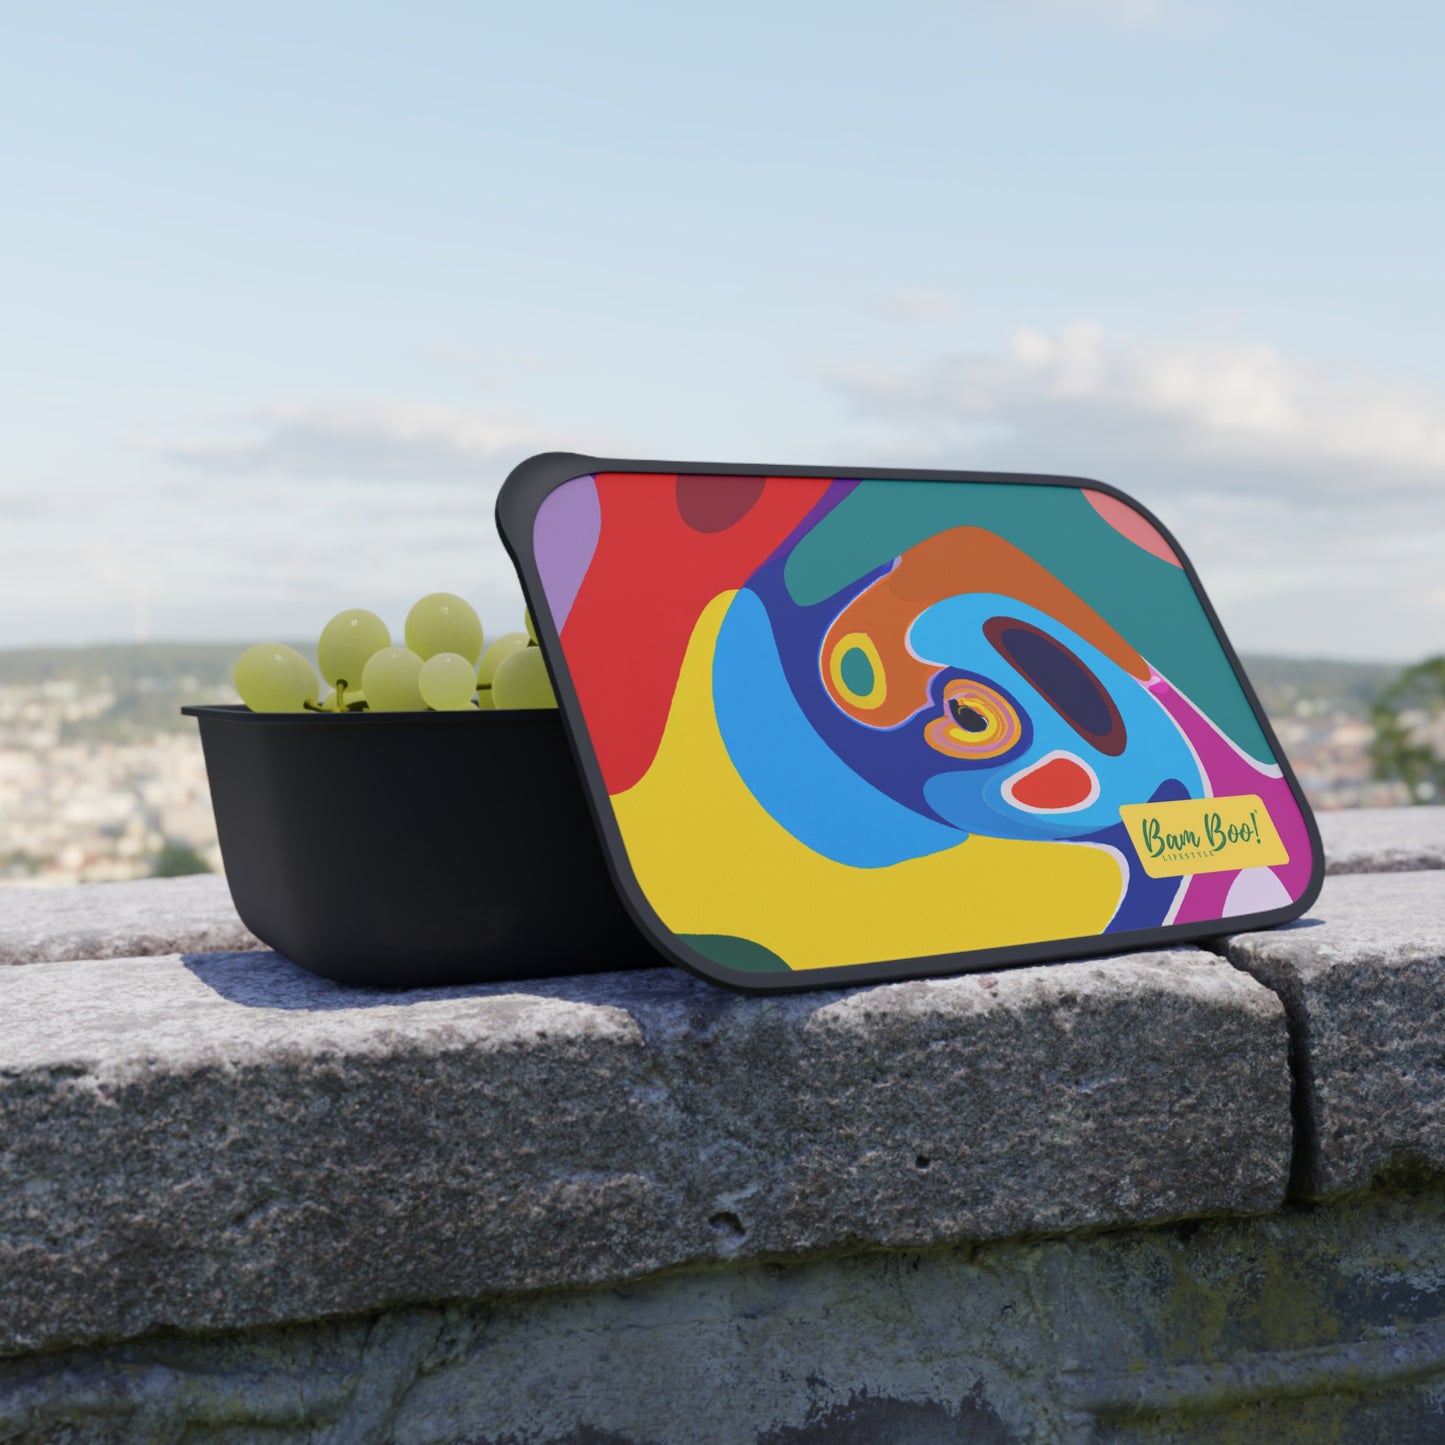 "Radiant Reflections" - Bam Boo! Lifestyle Eco-friendly PLA Bento Box with Band and Utensils